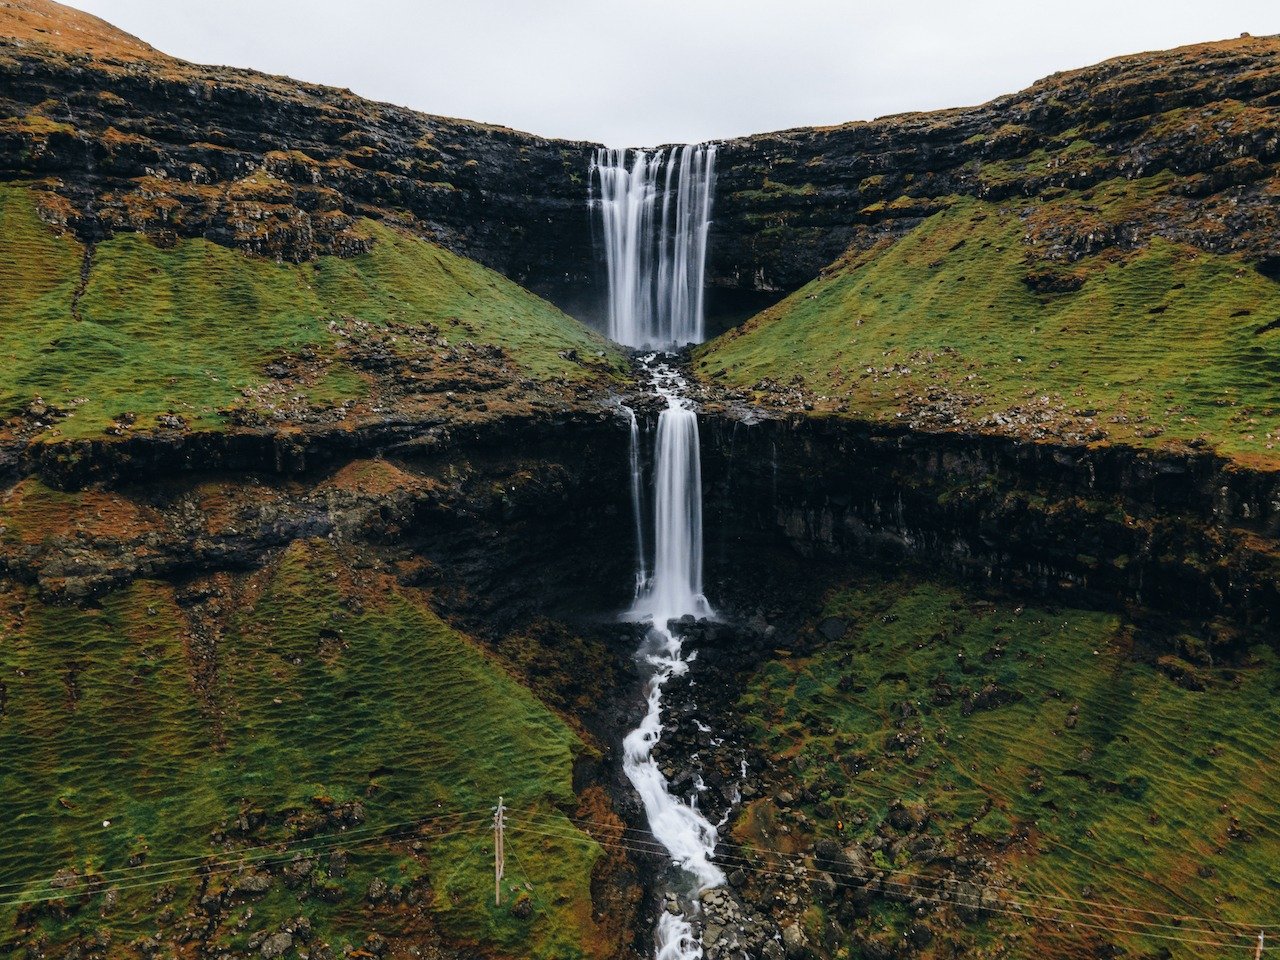 📍Foss&aacute; Waterfall, Streymoy, Faroe Islands

The tallest and most grand waterfall in the Faroe Islands, has to be the Foss&aacute; waterfall on the island of Streymoy. It features two large cascading drops at a total height of 140 meters. You c